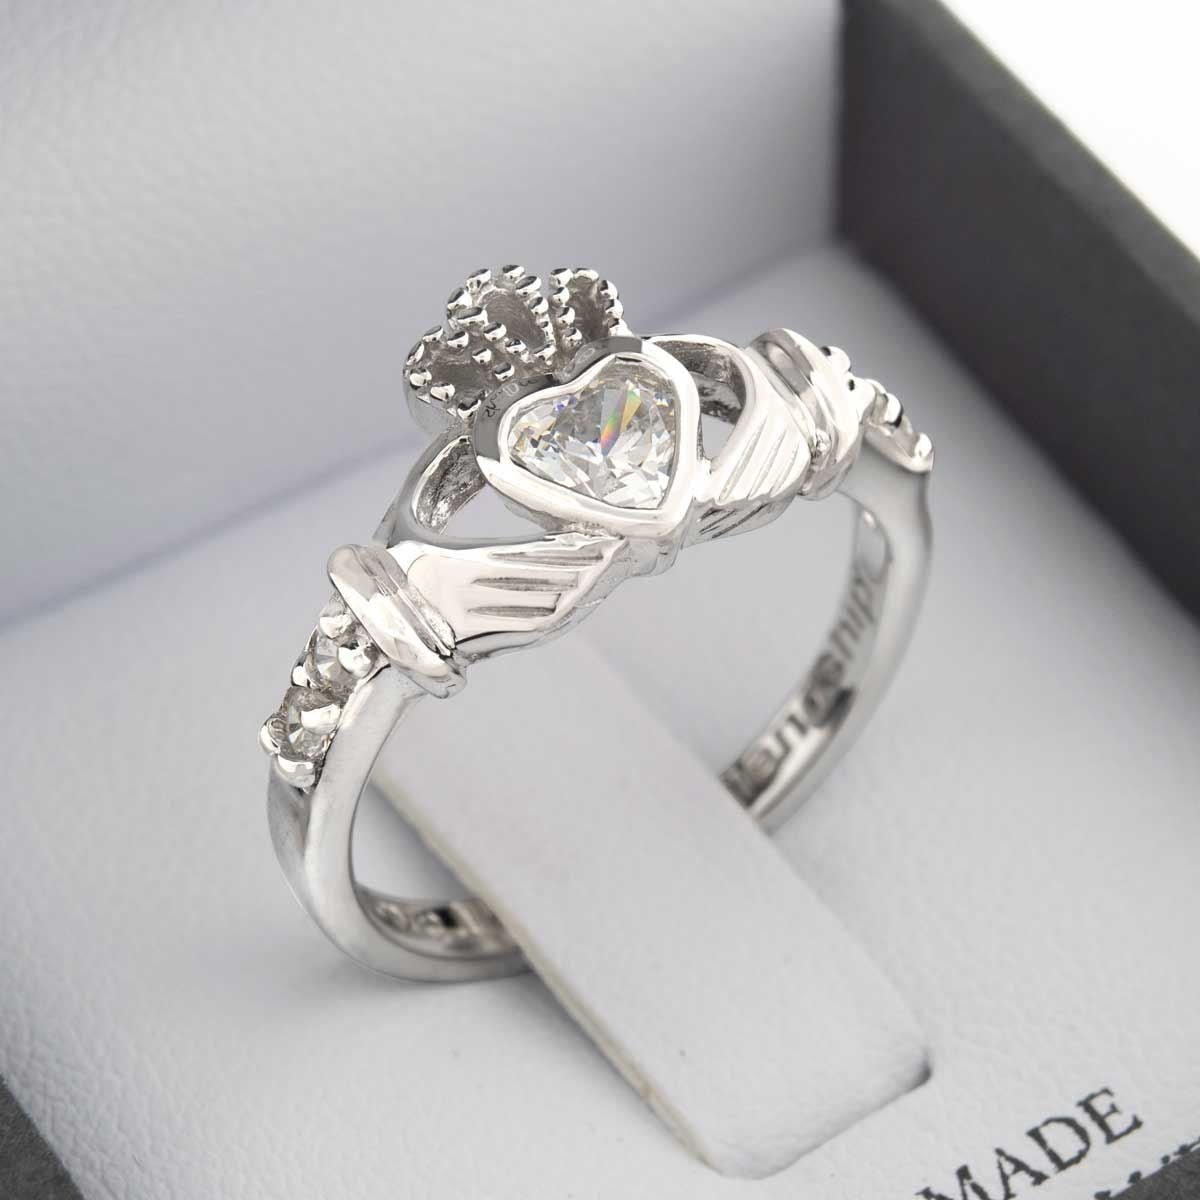 Shanore Silver Claddagh Ring April Birthstone